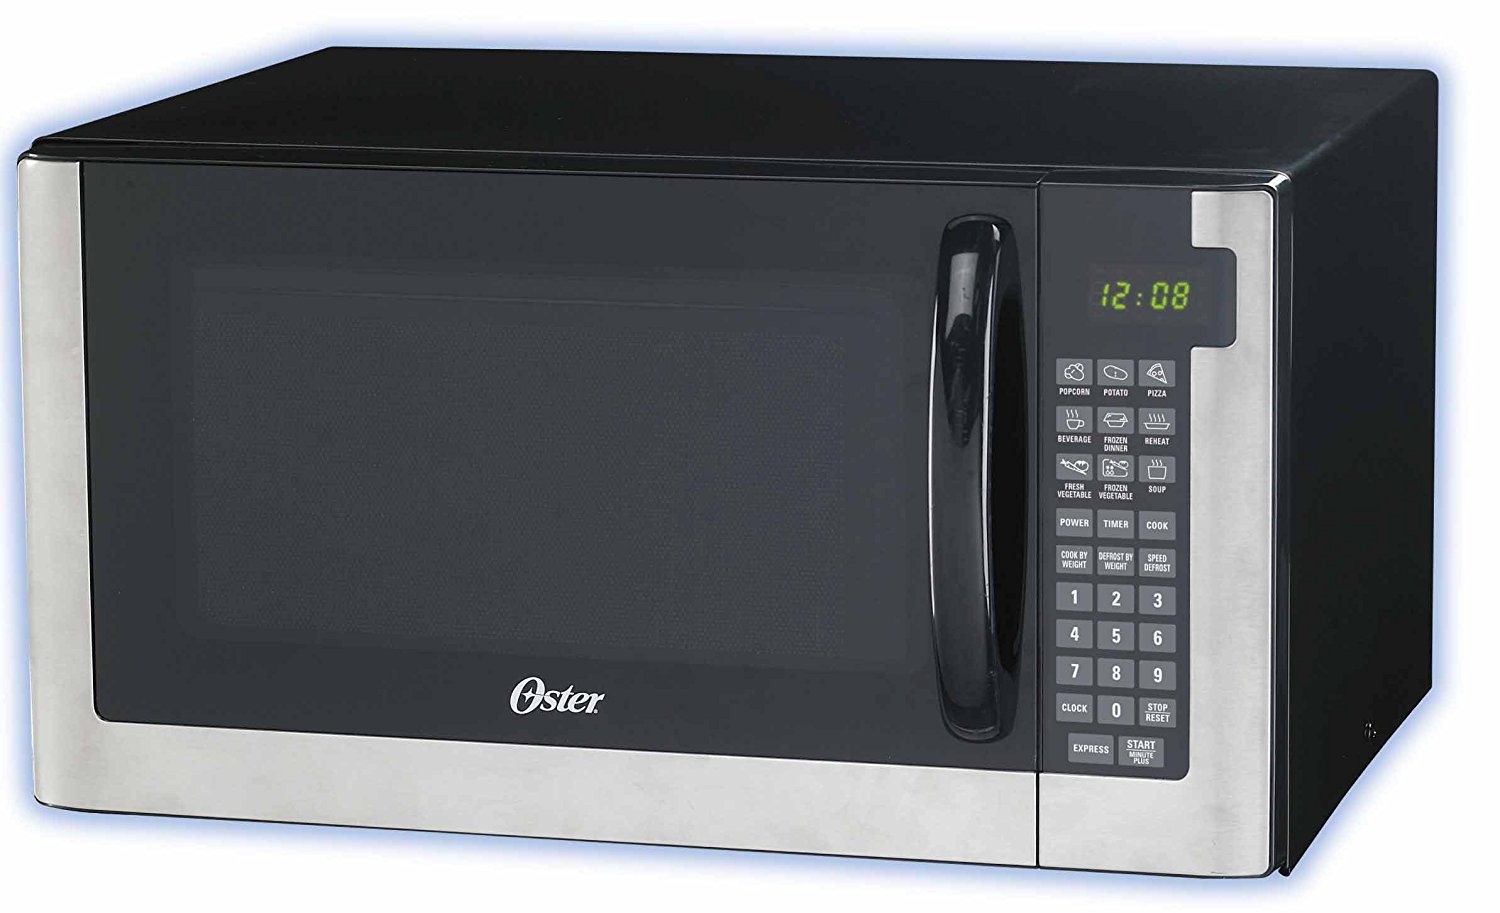 Oster 1.4 Cubic Foot Digital Microwave Oven